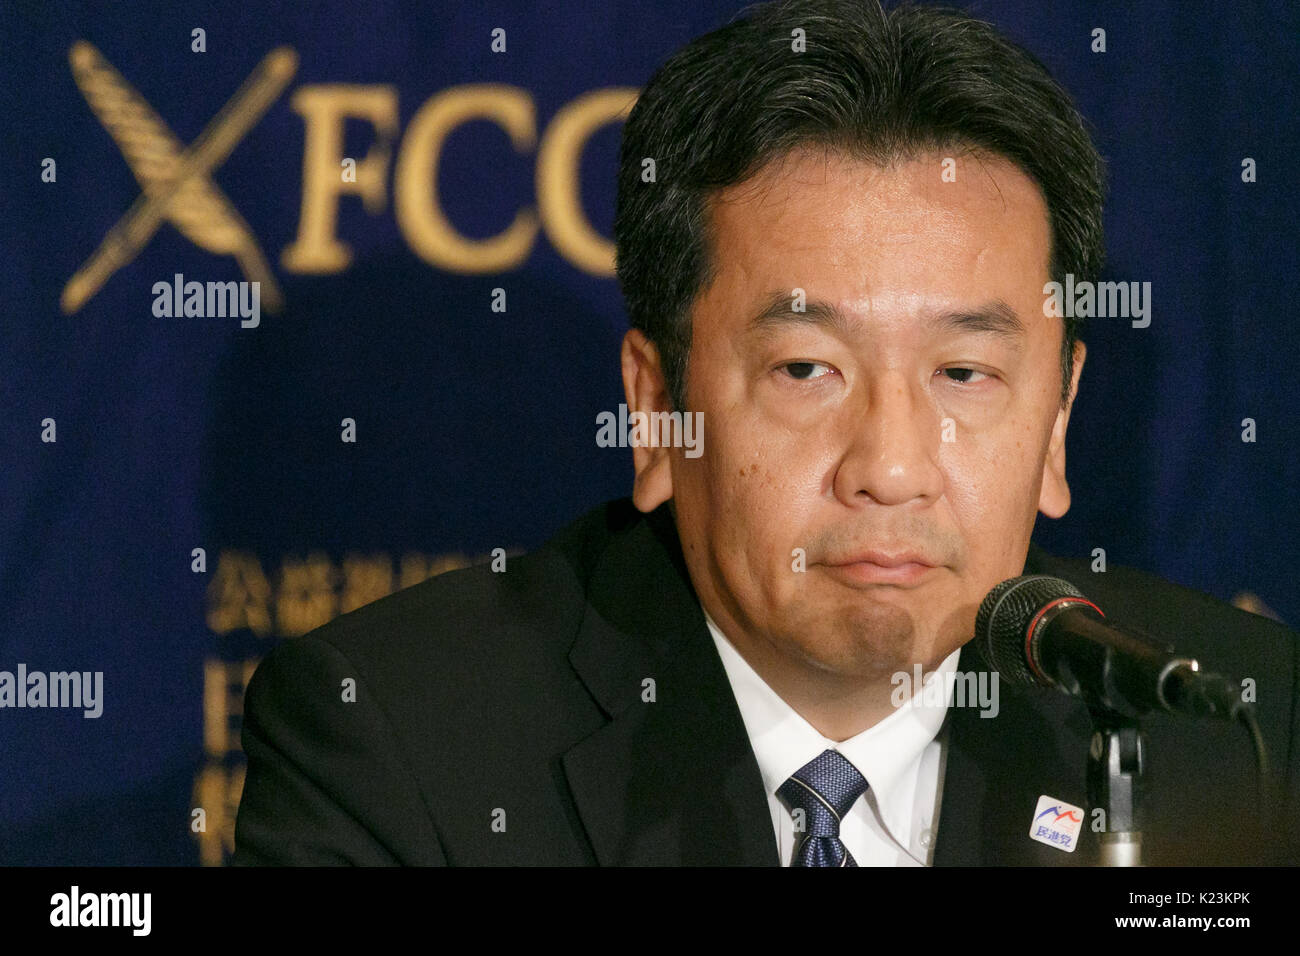 Former Democratic Party (DP) Secretary General Yukio Edano attends a news conference at the Foreign Correspondents' Club of Japan on August 29, 2017, Tokyo, Japan. Edano and former DP Foreign Minister, Maehara, visited the Club to speak about the opposition party's leadership election which will be held on September 1st. They also commented North Korea's missile launch that flew over Japan this morning. Credit: Rodrigo Reyes Marin/AFLO/Alamy Live News Stock Photo